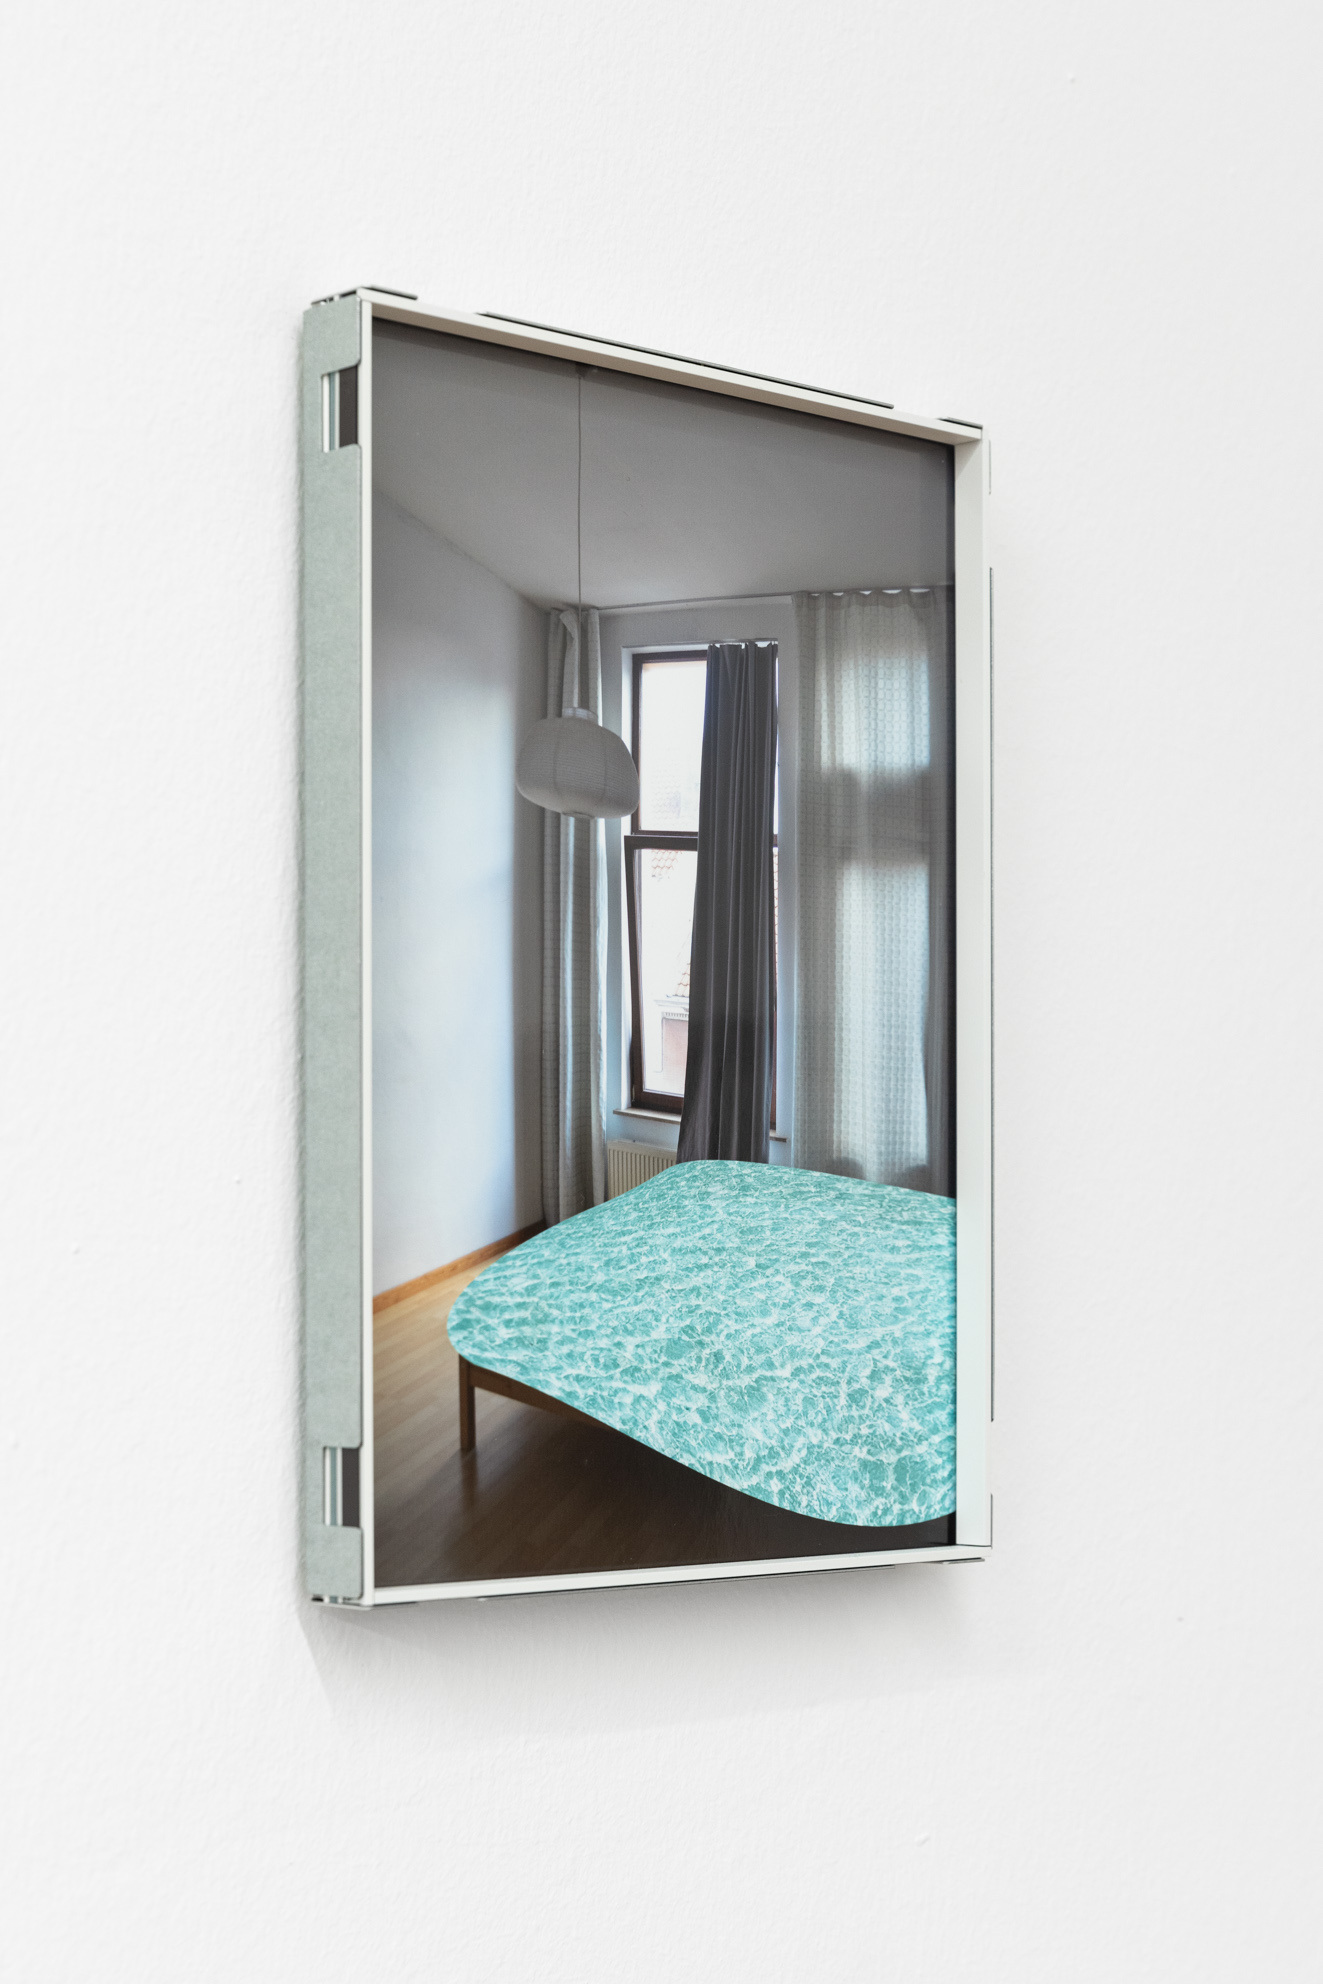 Judith Adelmann a room of one's own 2016/2023, photo collage, 29,7 x 21 cm